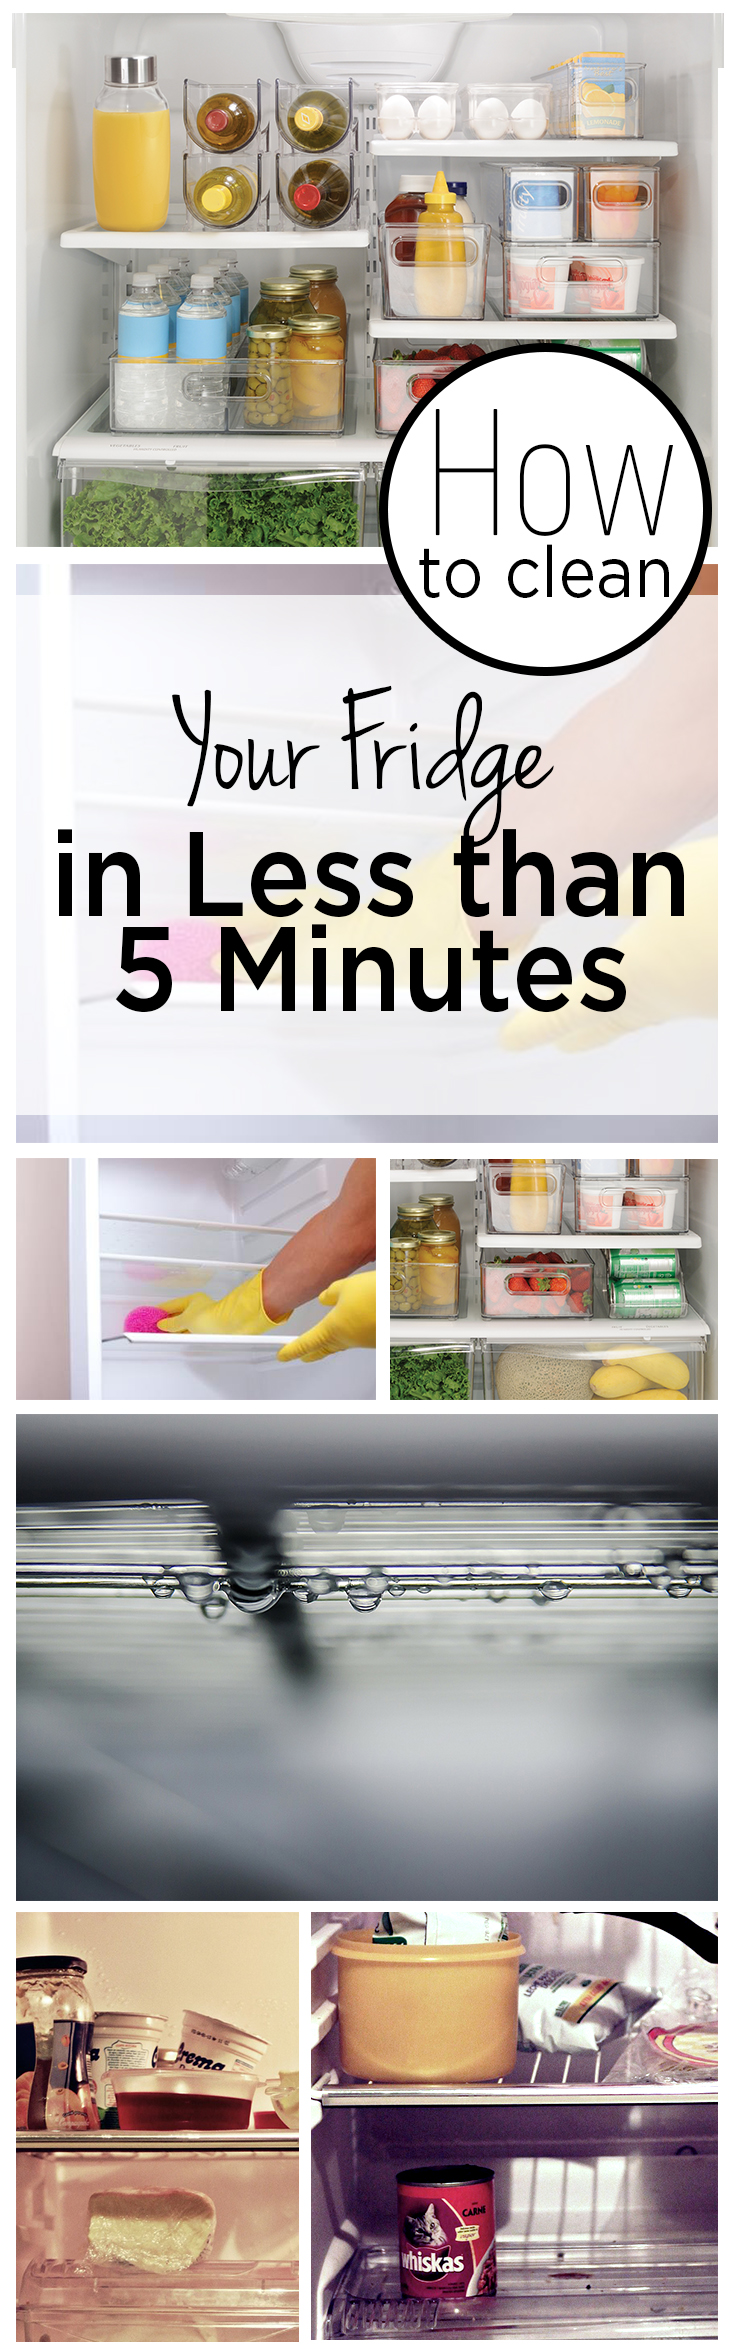 How To Clean Your Fridge in Less than 5 Minutes